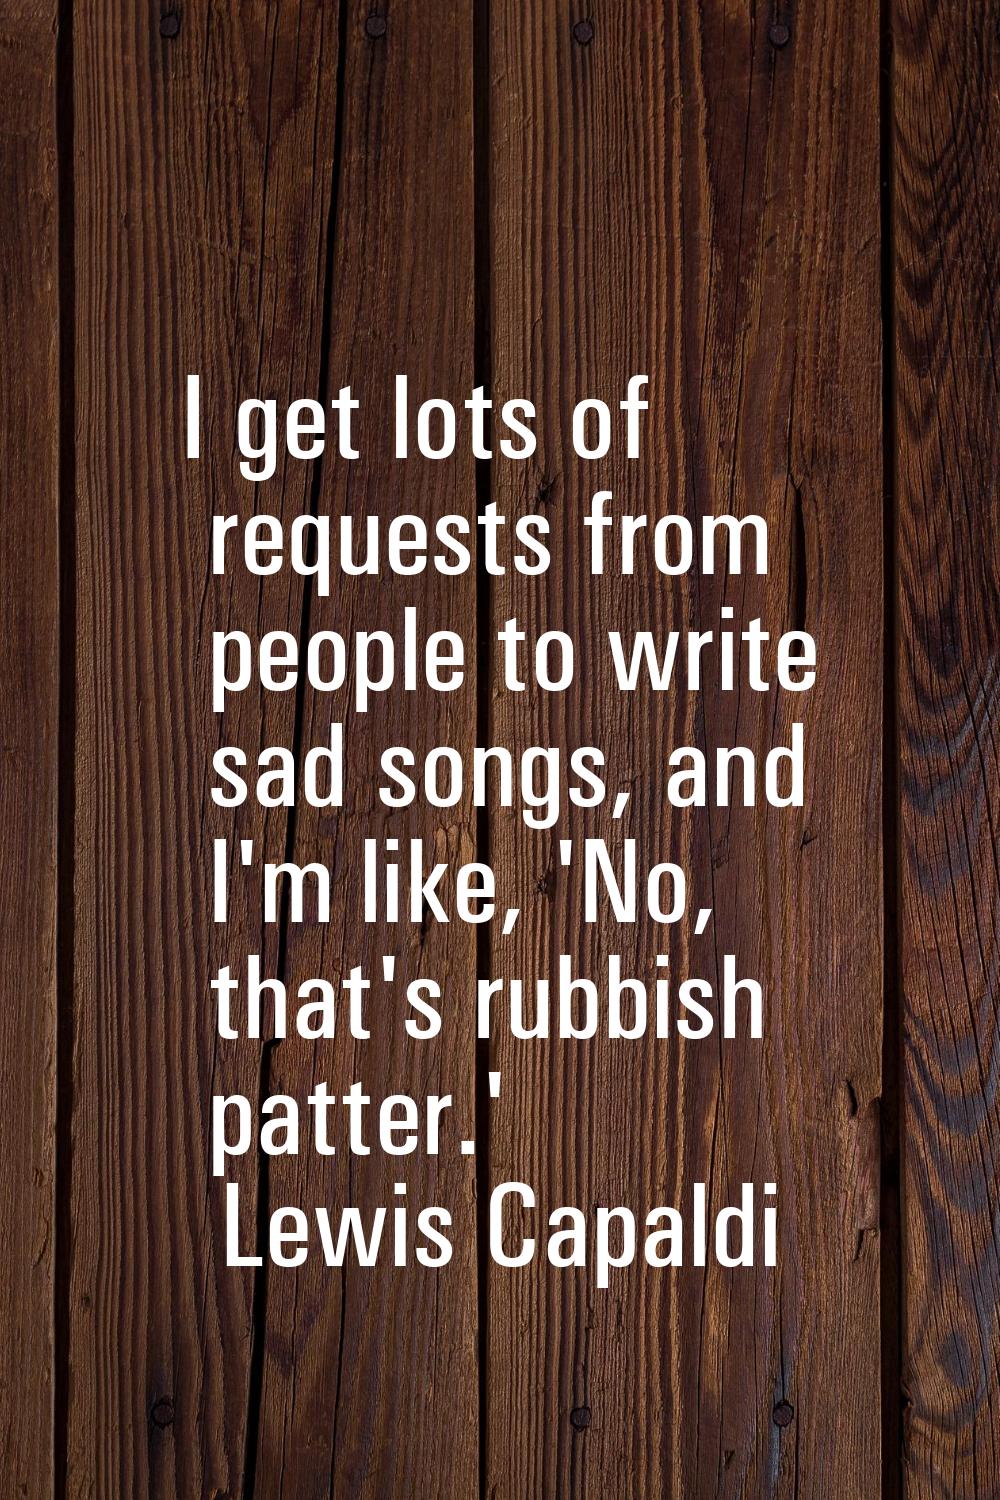 I get lots of requests from people to write sad songs, and I'm like, 'No, that's rubbish patter.'